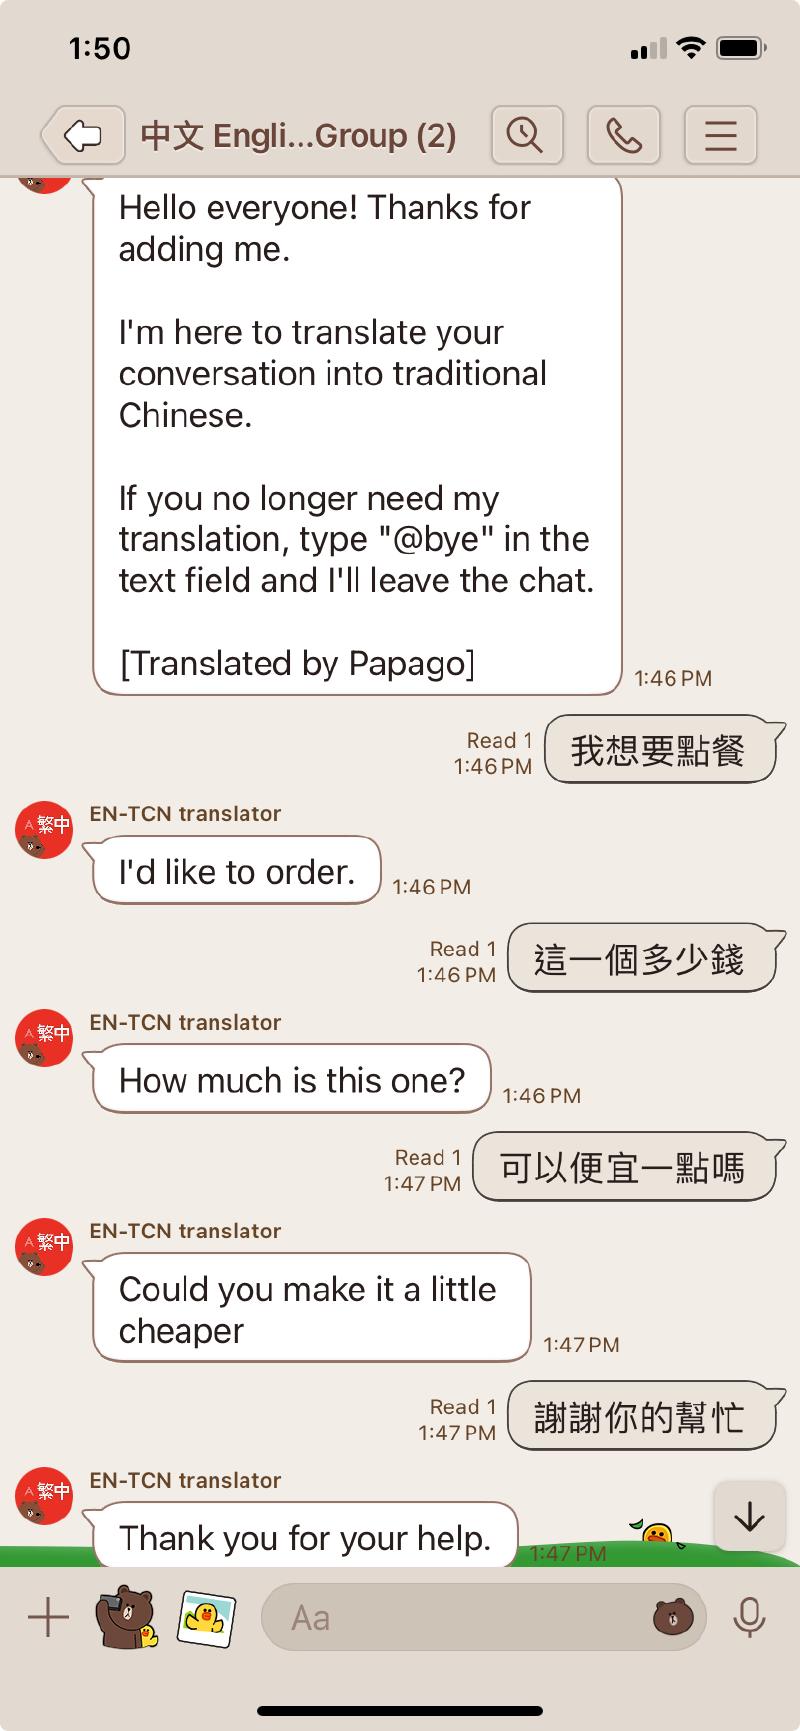 Featured image of post LINE Free Chat Translation Bot: Add as a Friend to Translate Conversations with Foreigners Instantly - Supports Chinese, English, Japanese, Korean, Thai, Indonesian and More Languages for Real-time Translation in LINE Groups, Perfect for 'Overseas Travel' and 'Daily Chat' Translation Needs